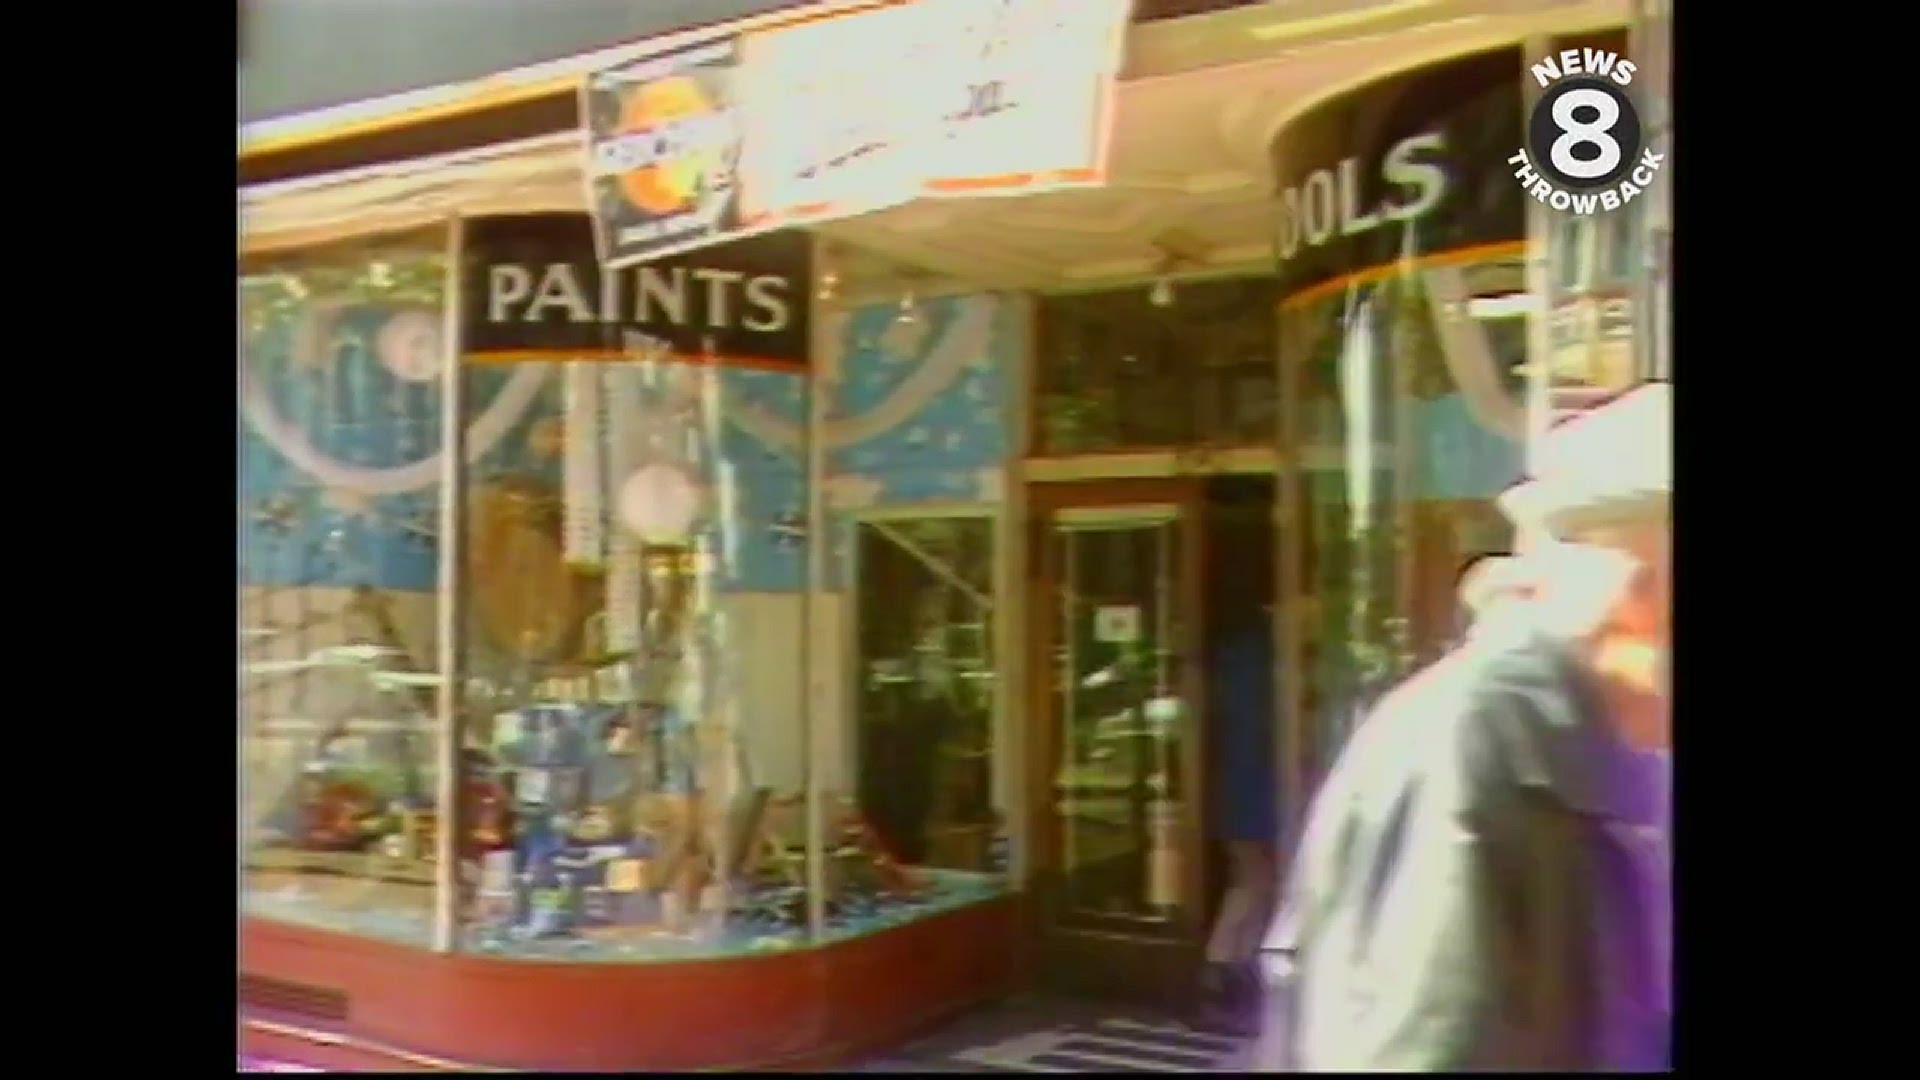 A trip to longtime business San Diego Hardware in 1983